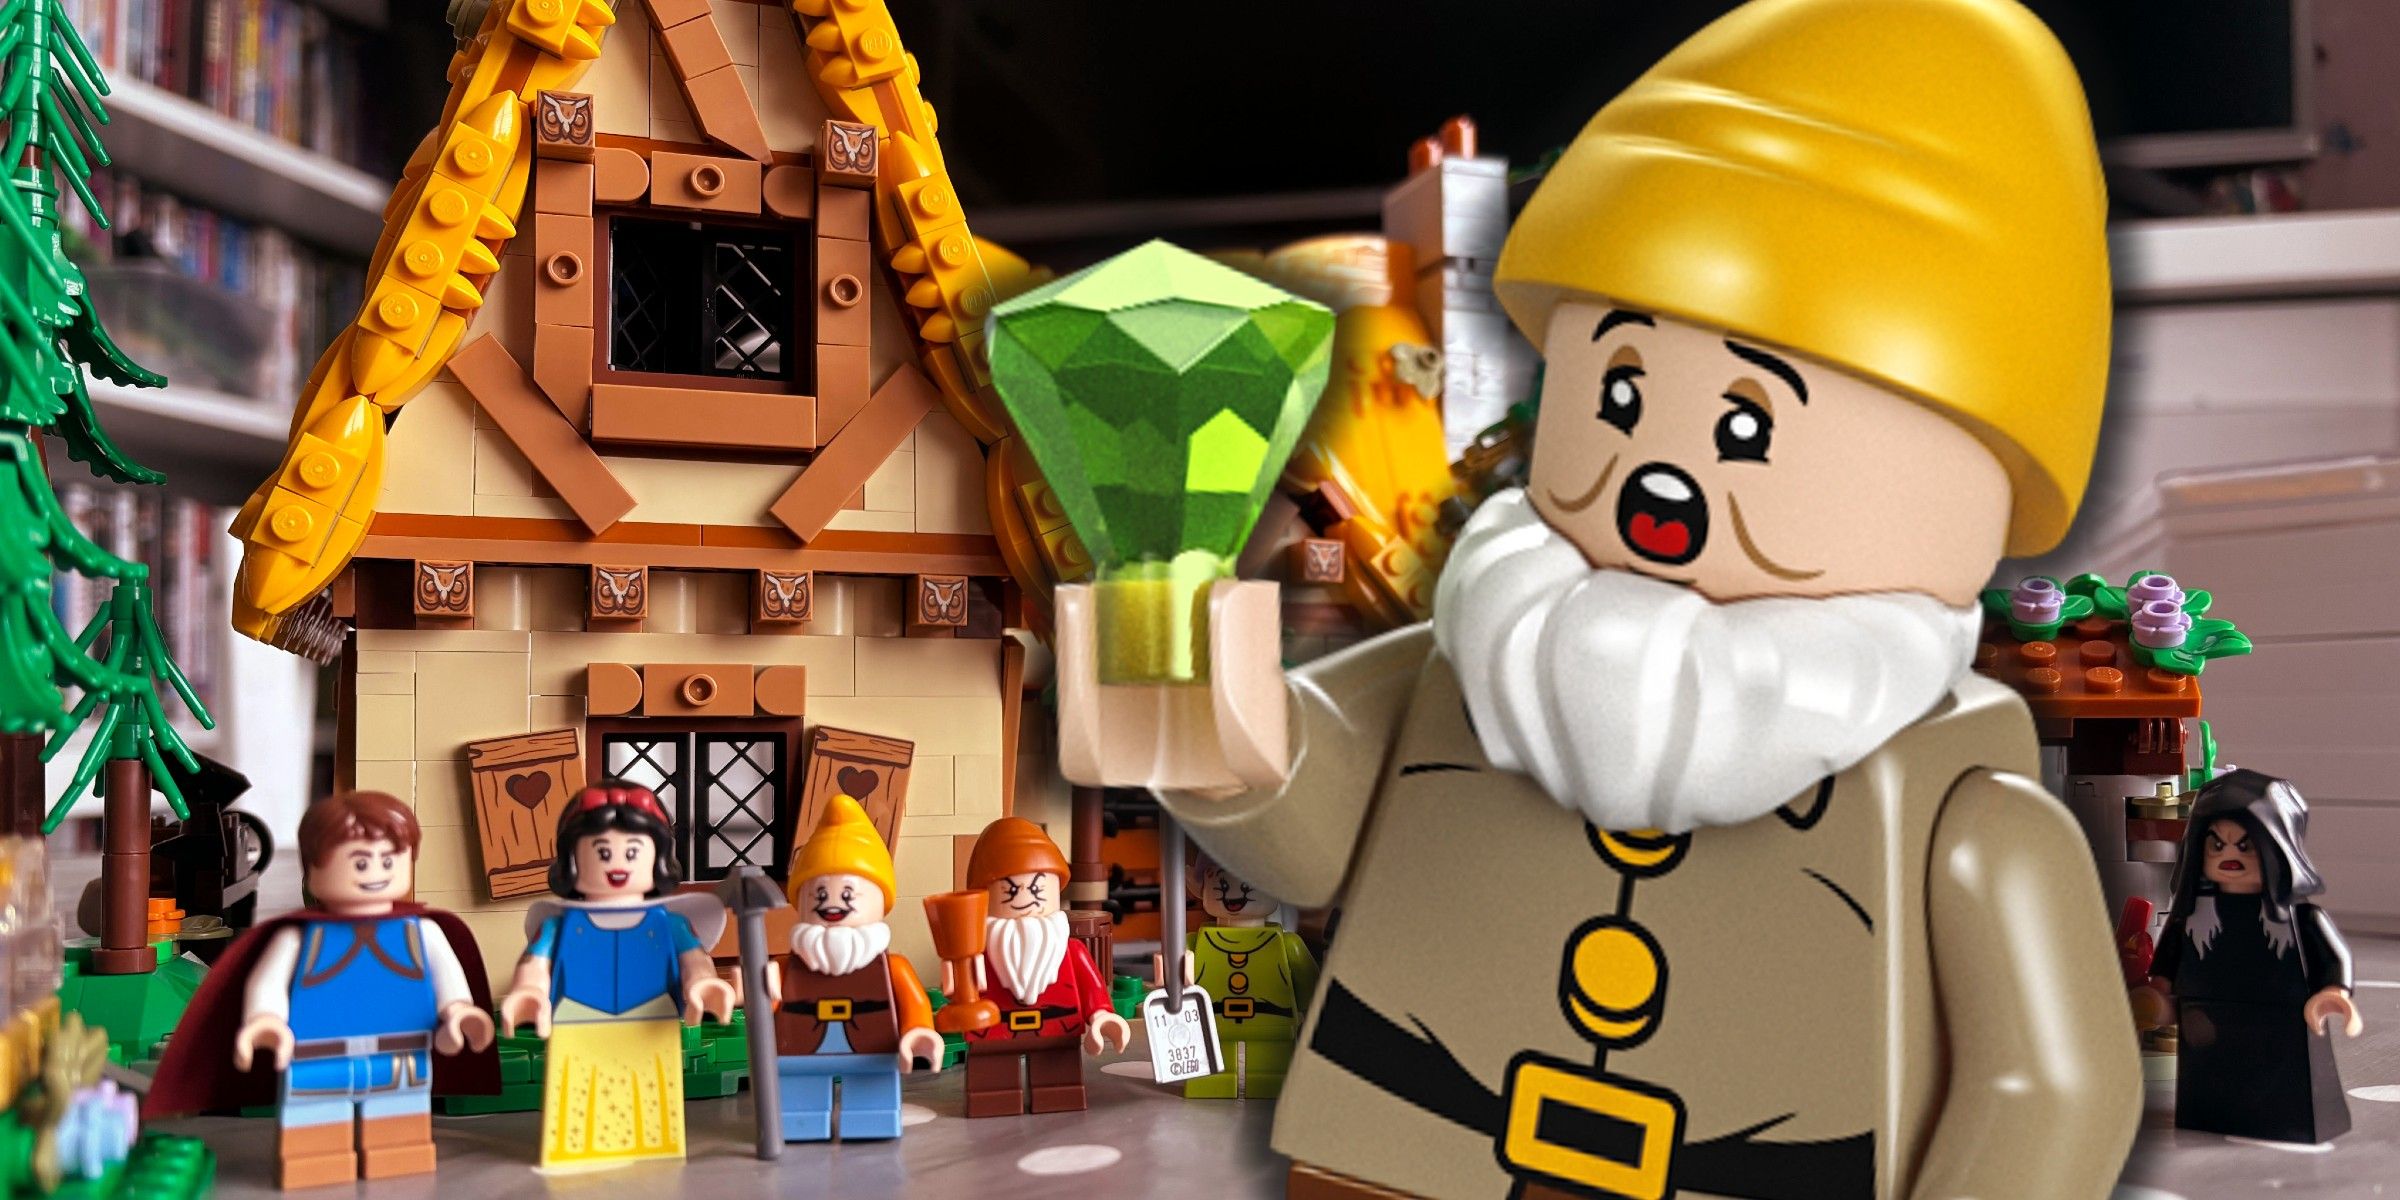 Sneezy and the LEGO Snow White Cottage